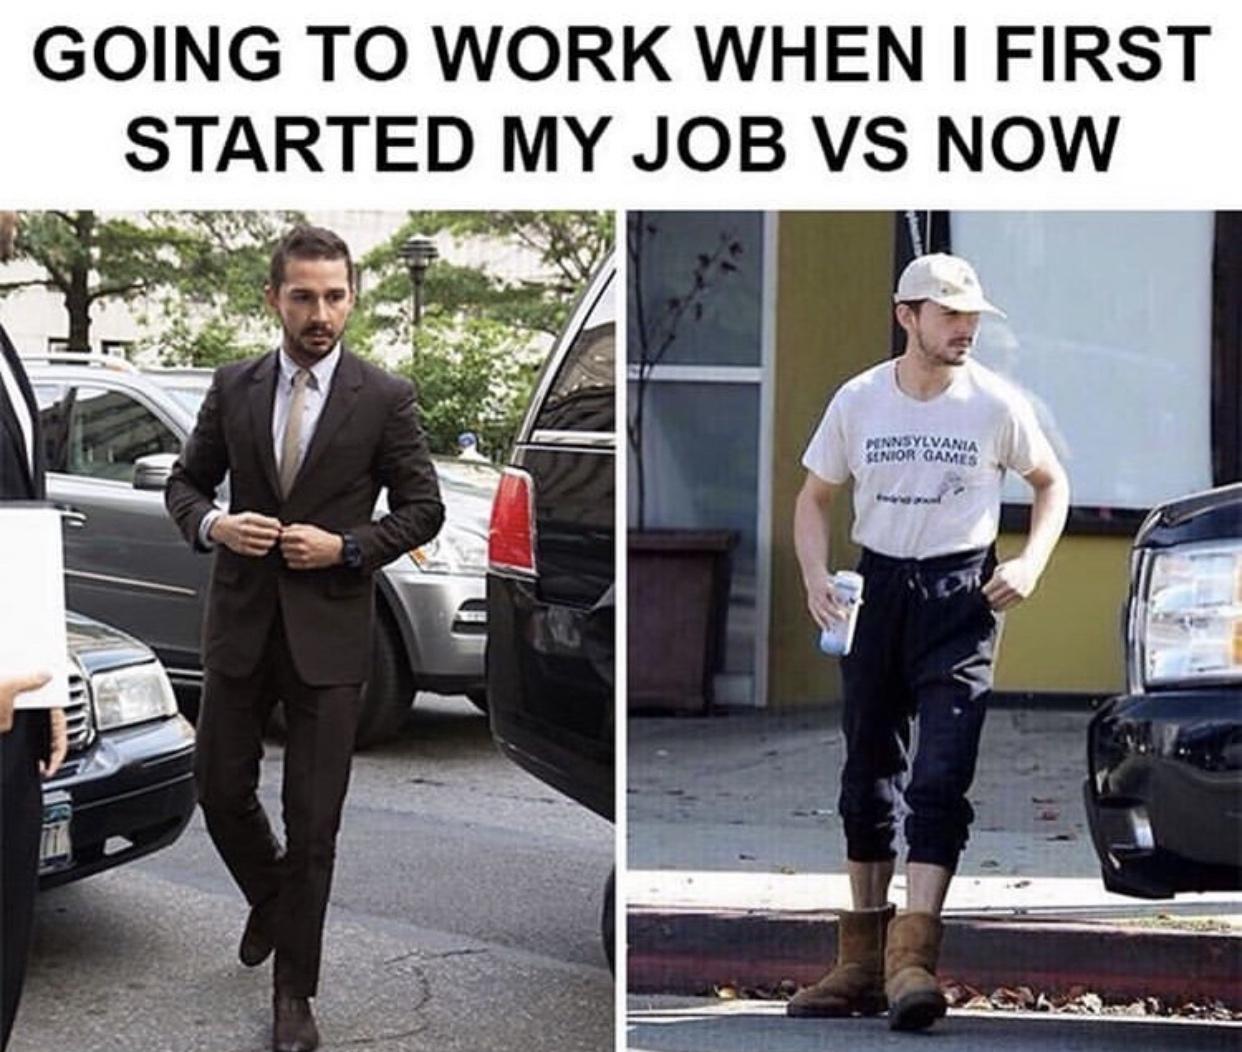 funny work memes - Going To Work When I First Started My Job Vs Now Pennsylvania Senior Games